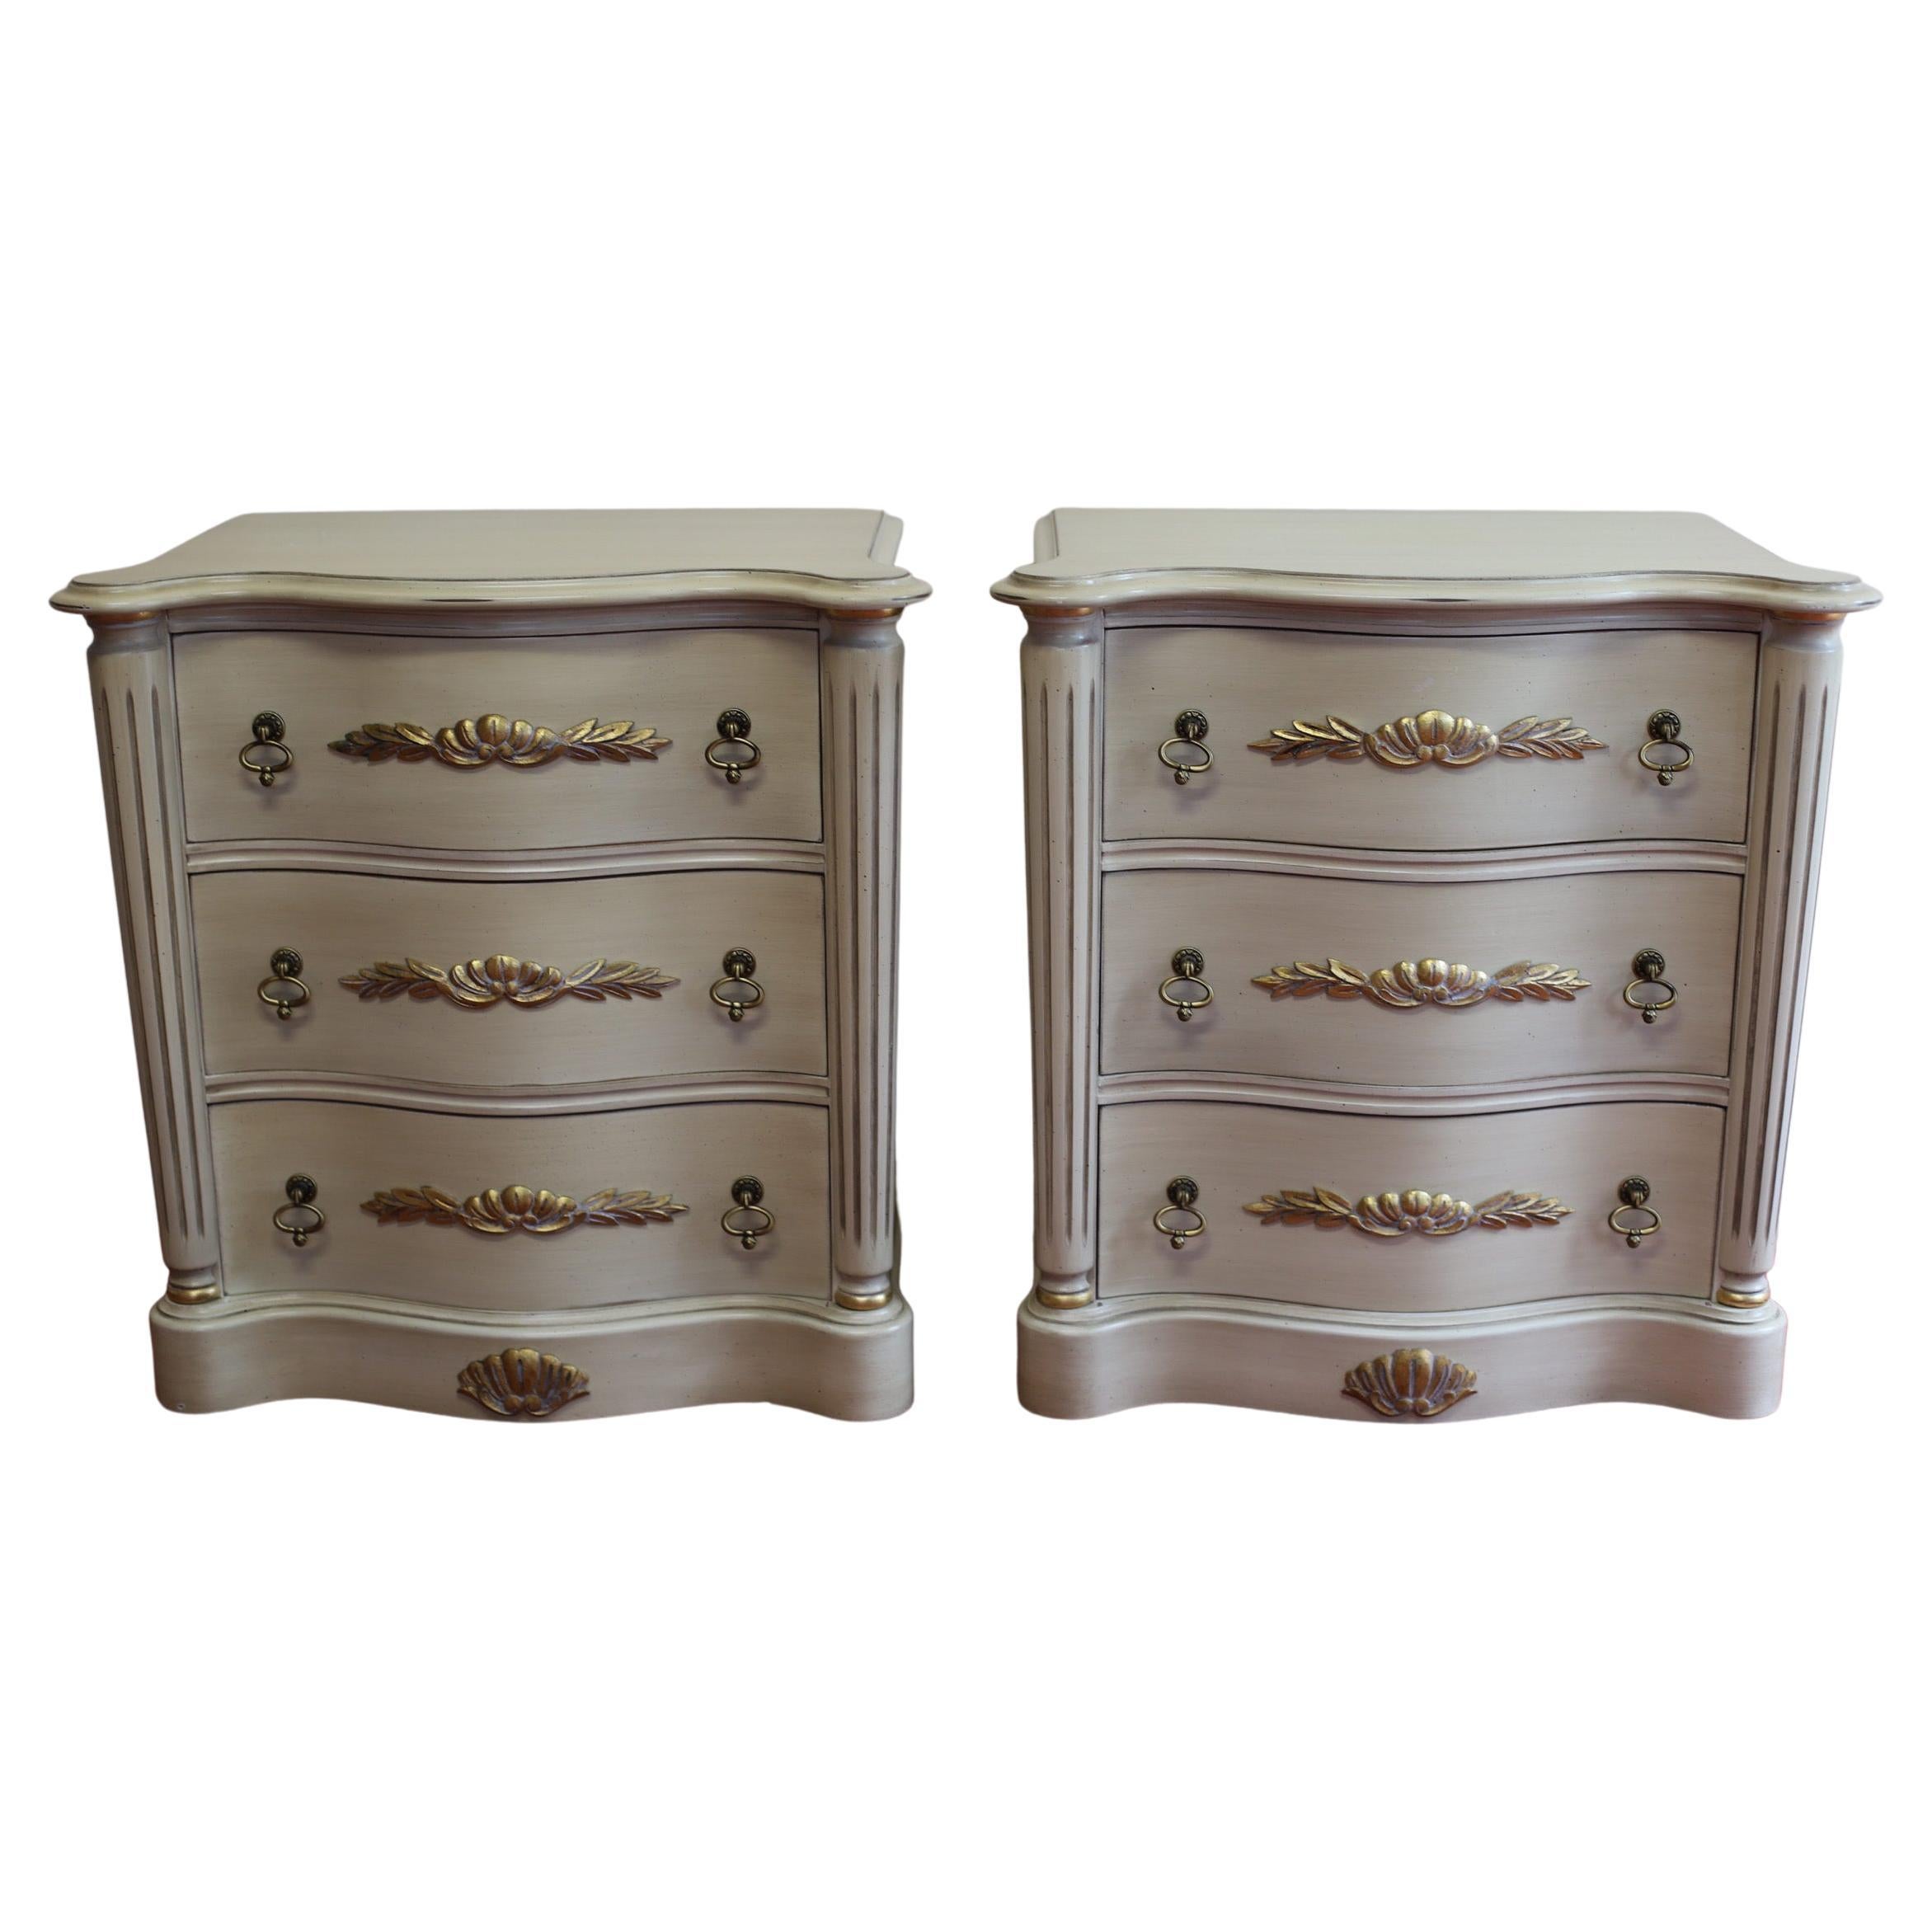 Lovely Pair Of Painted French Provincial Style  Nightstands  For Sale